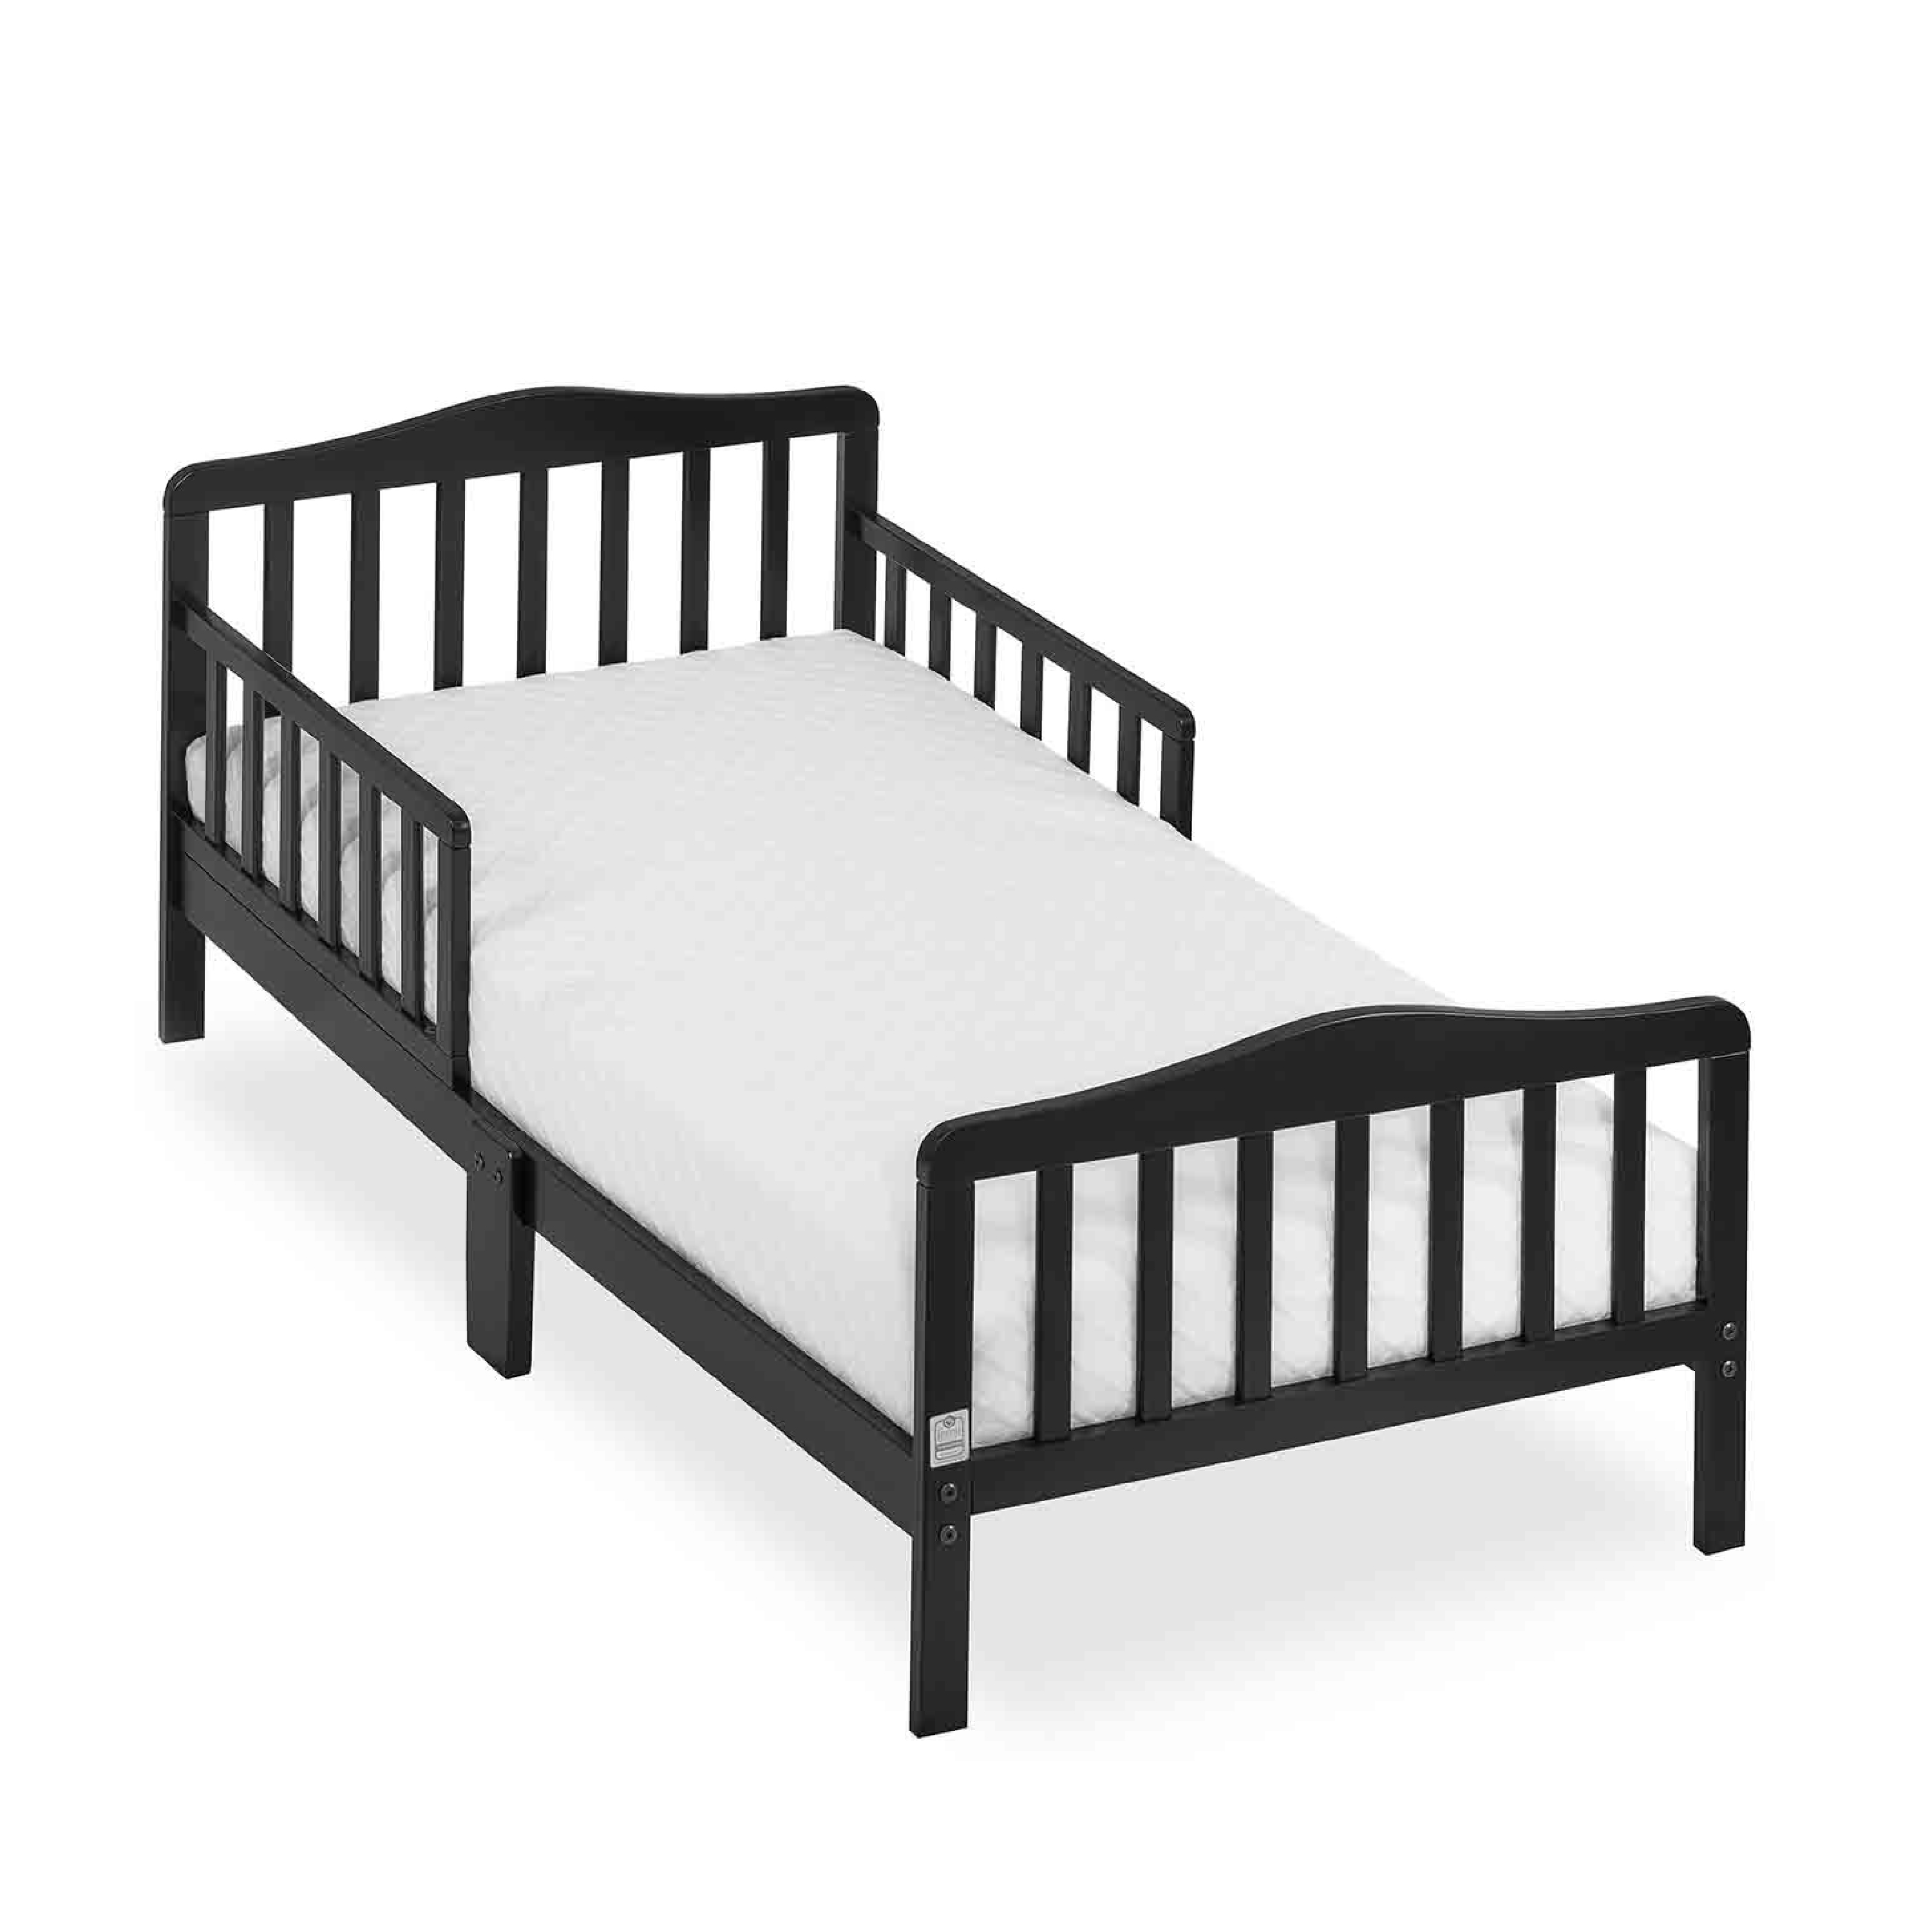 Dream On Me Classic Design Toddler Bed, Black - image 1 of 10